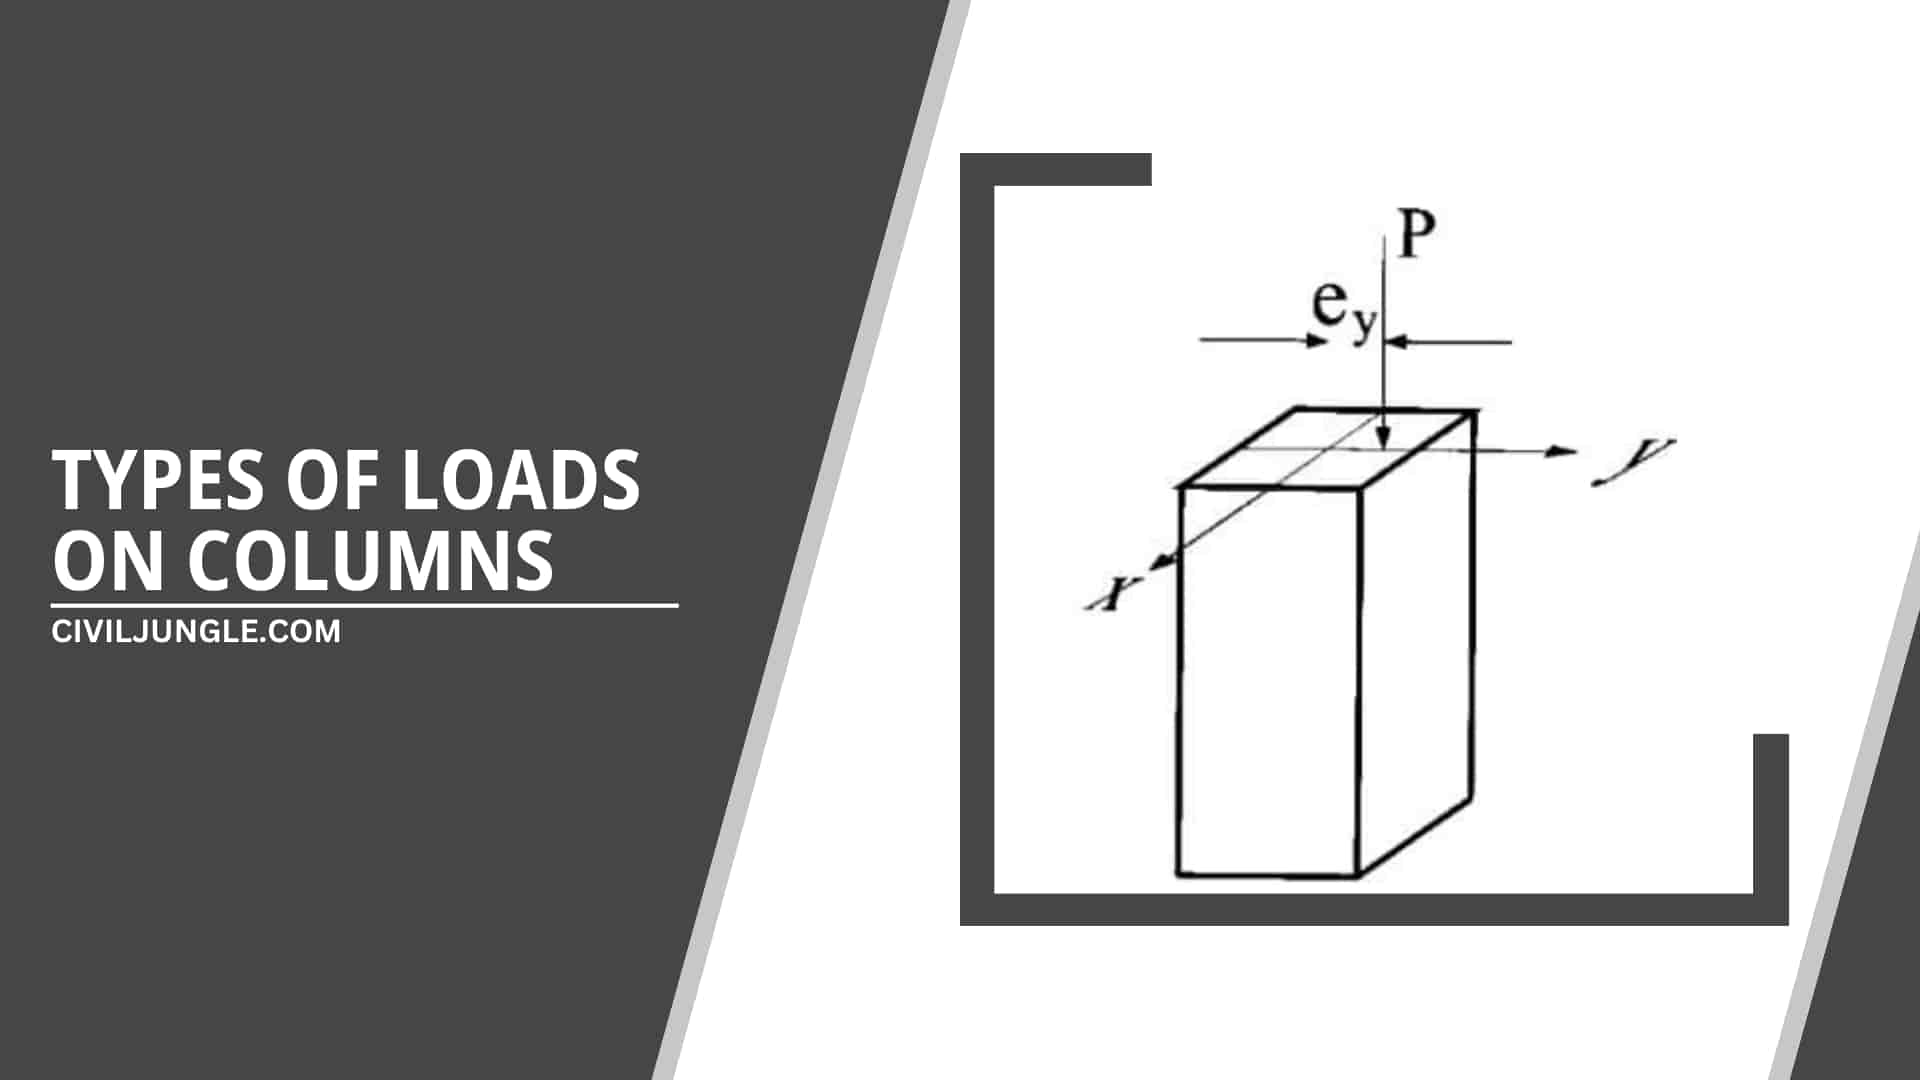 Types of Loads on Columns: